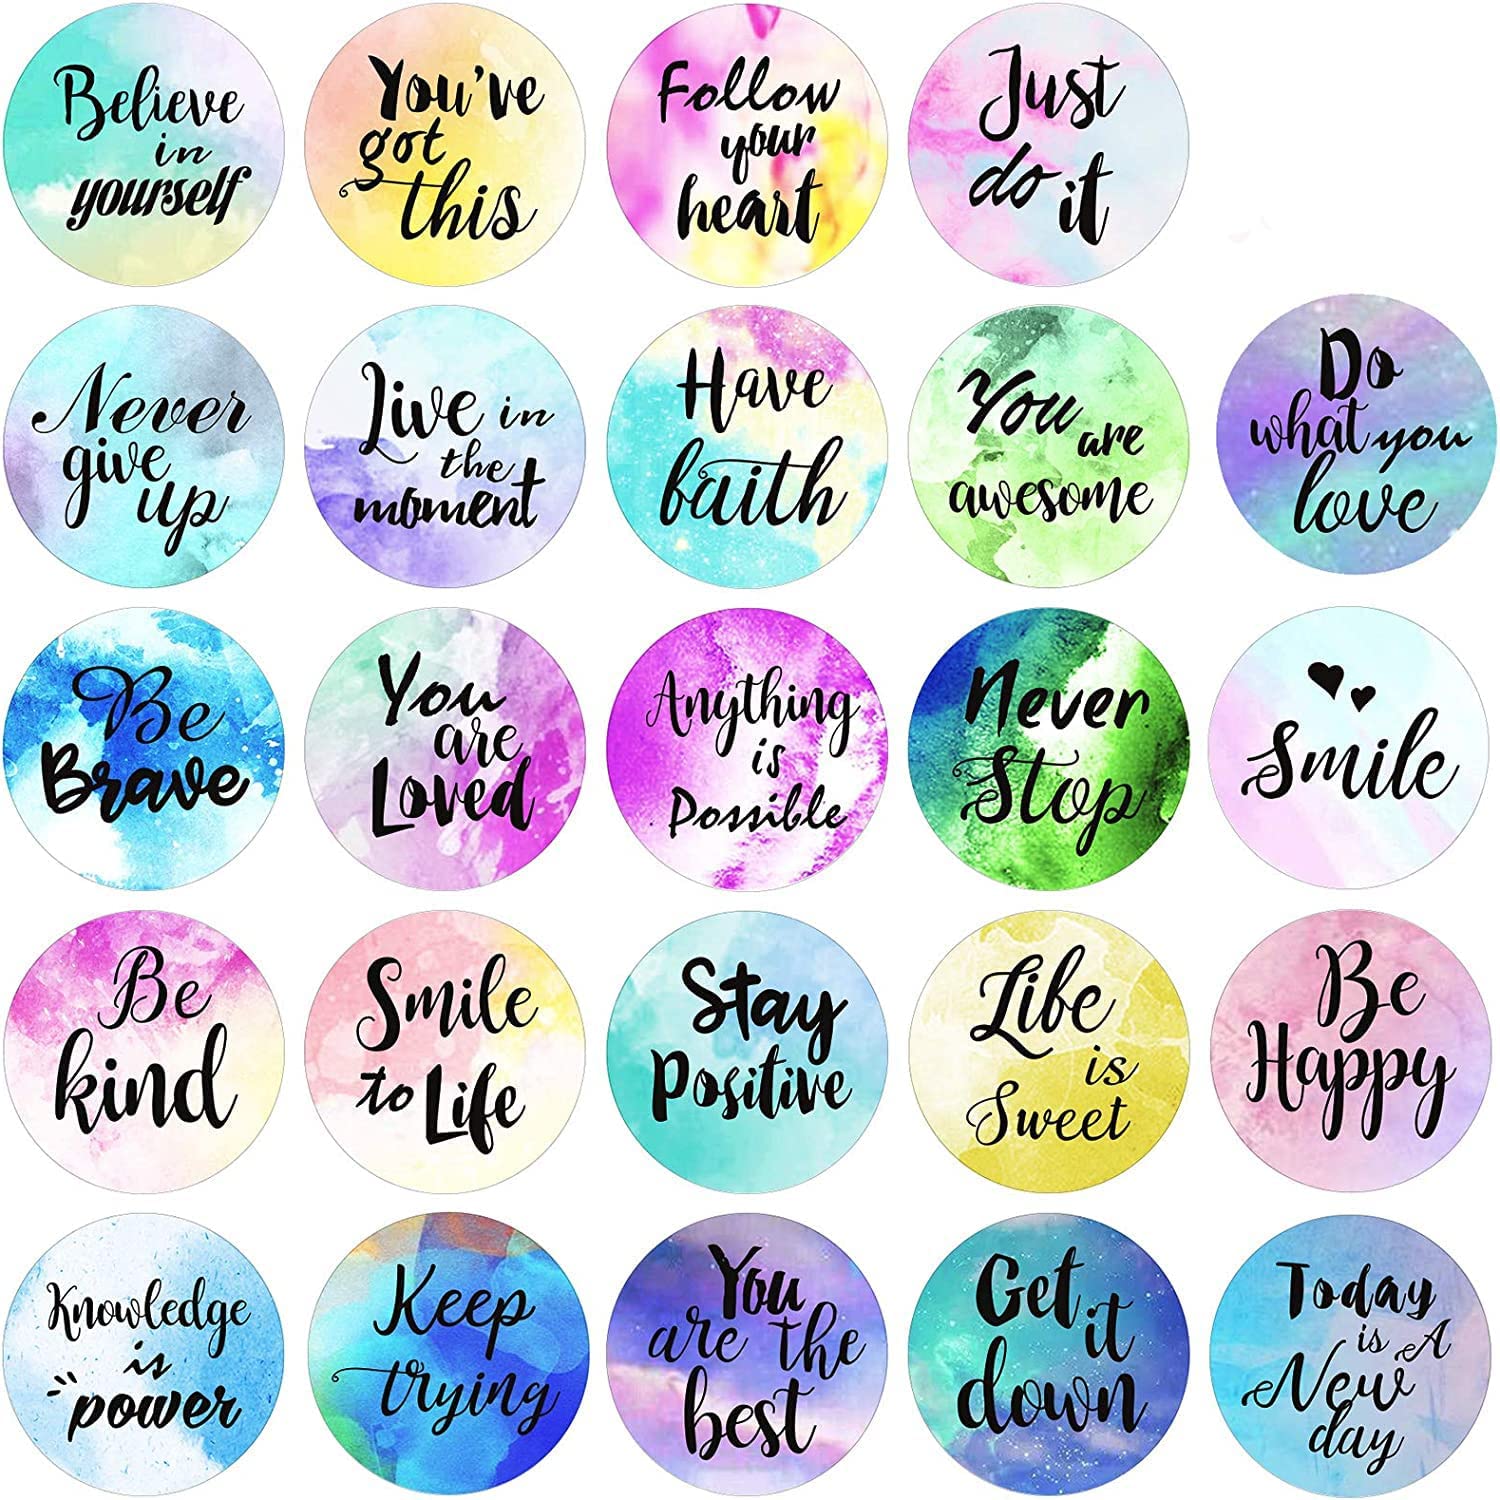 Stickers with inspirational quotes